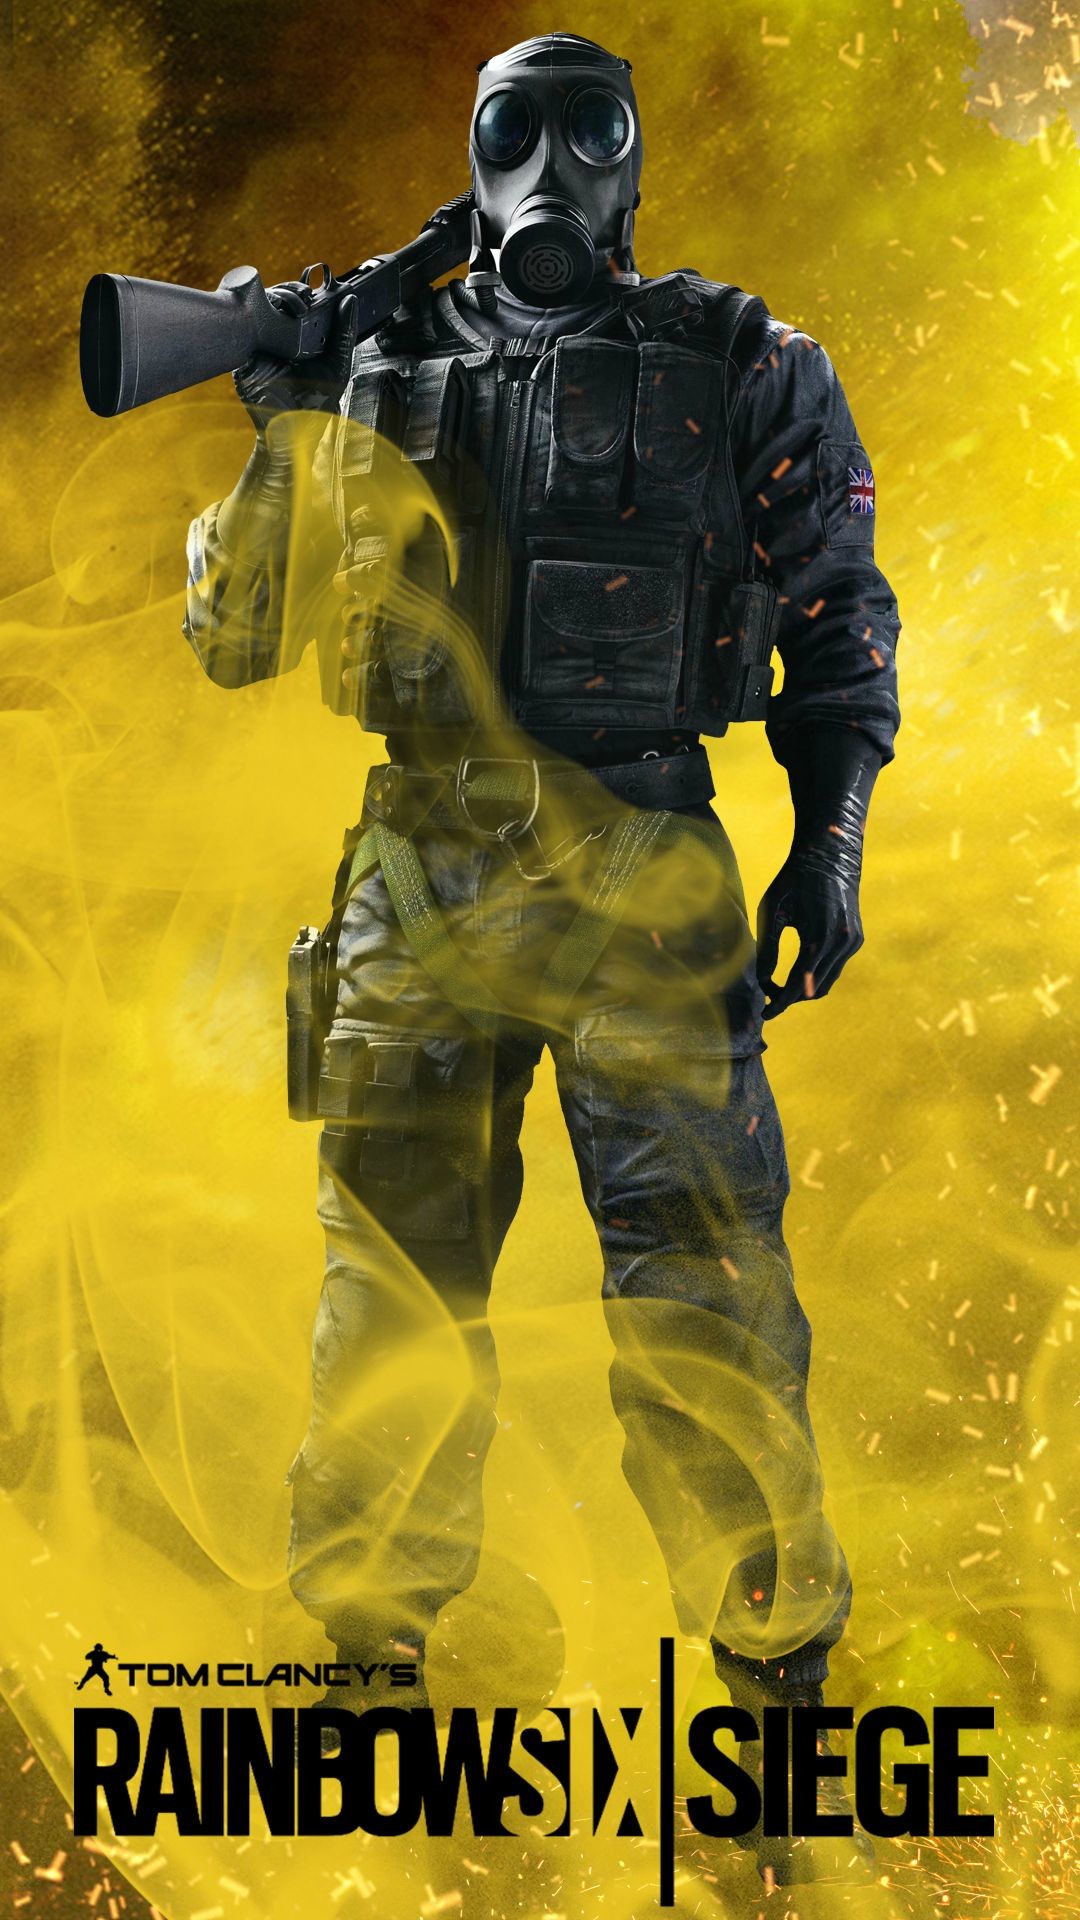 rainbow six siege smoke wallpaper,movie,personal protective equipment,poster,soldier,shooter game